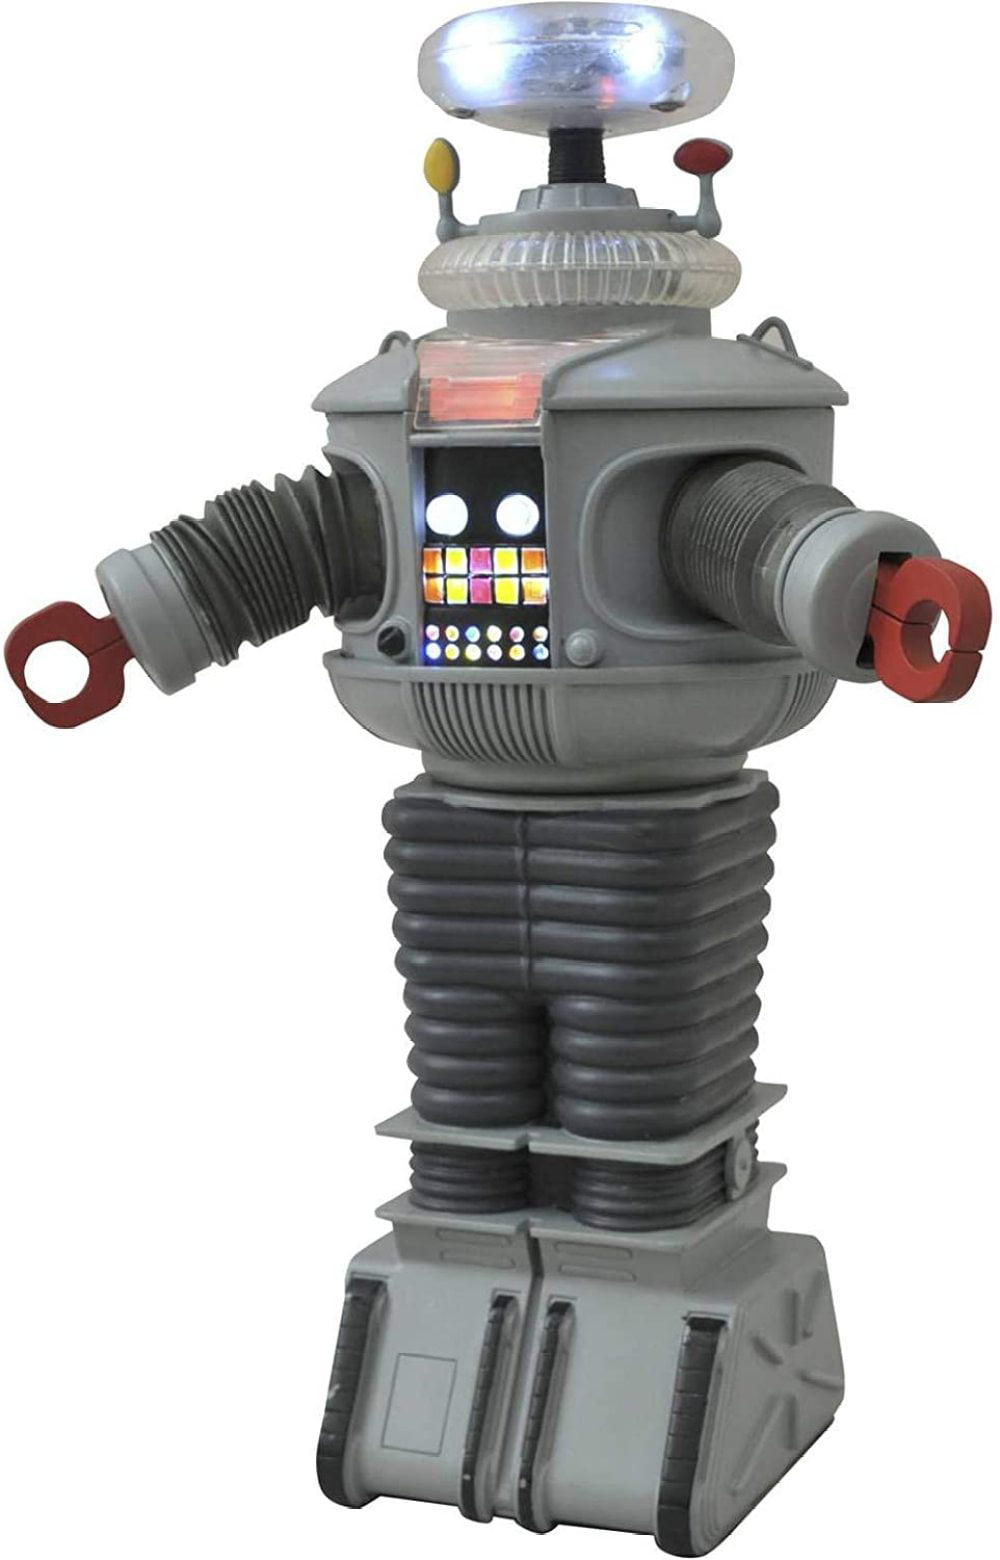 Limited Edition 14" Lost in Space B-9 Robot Collector's Cookie Jar 